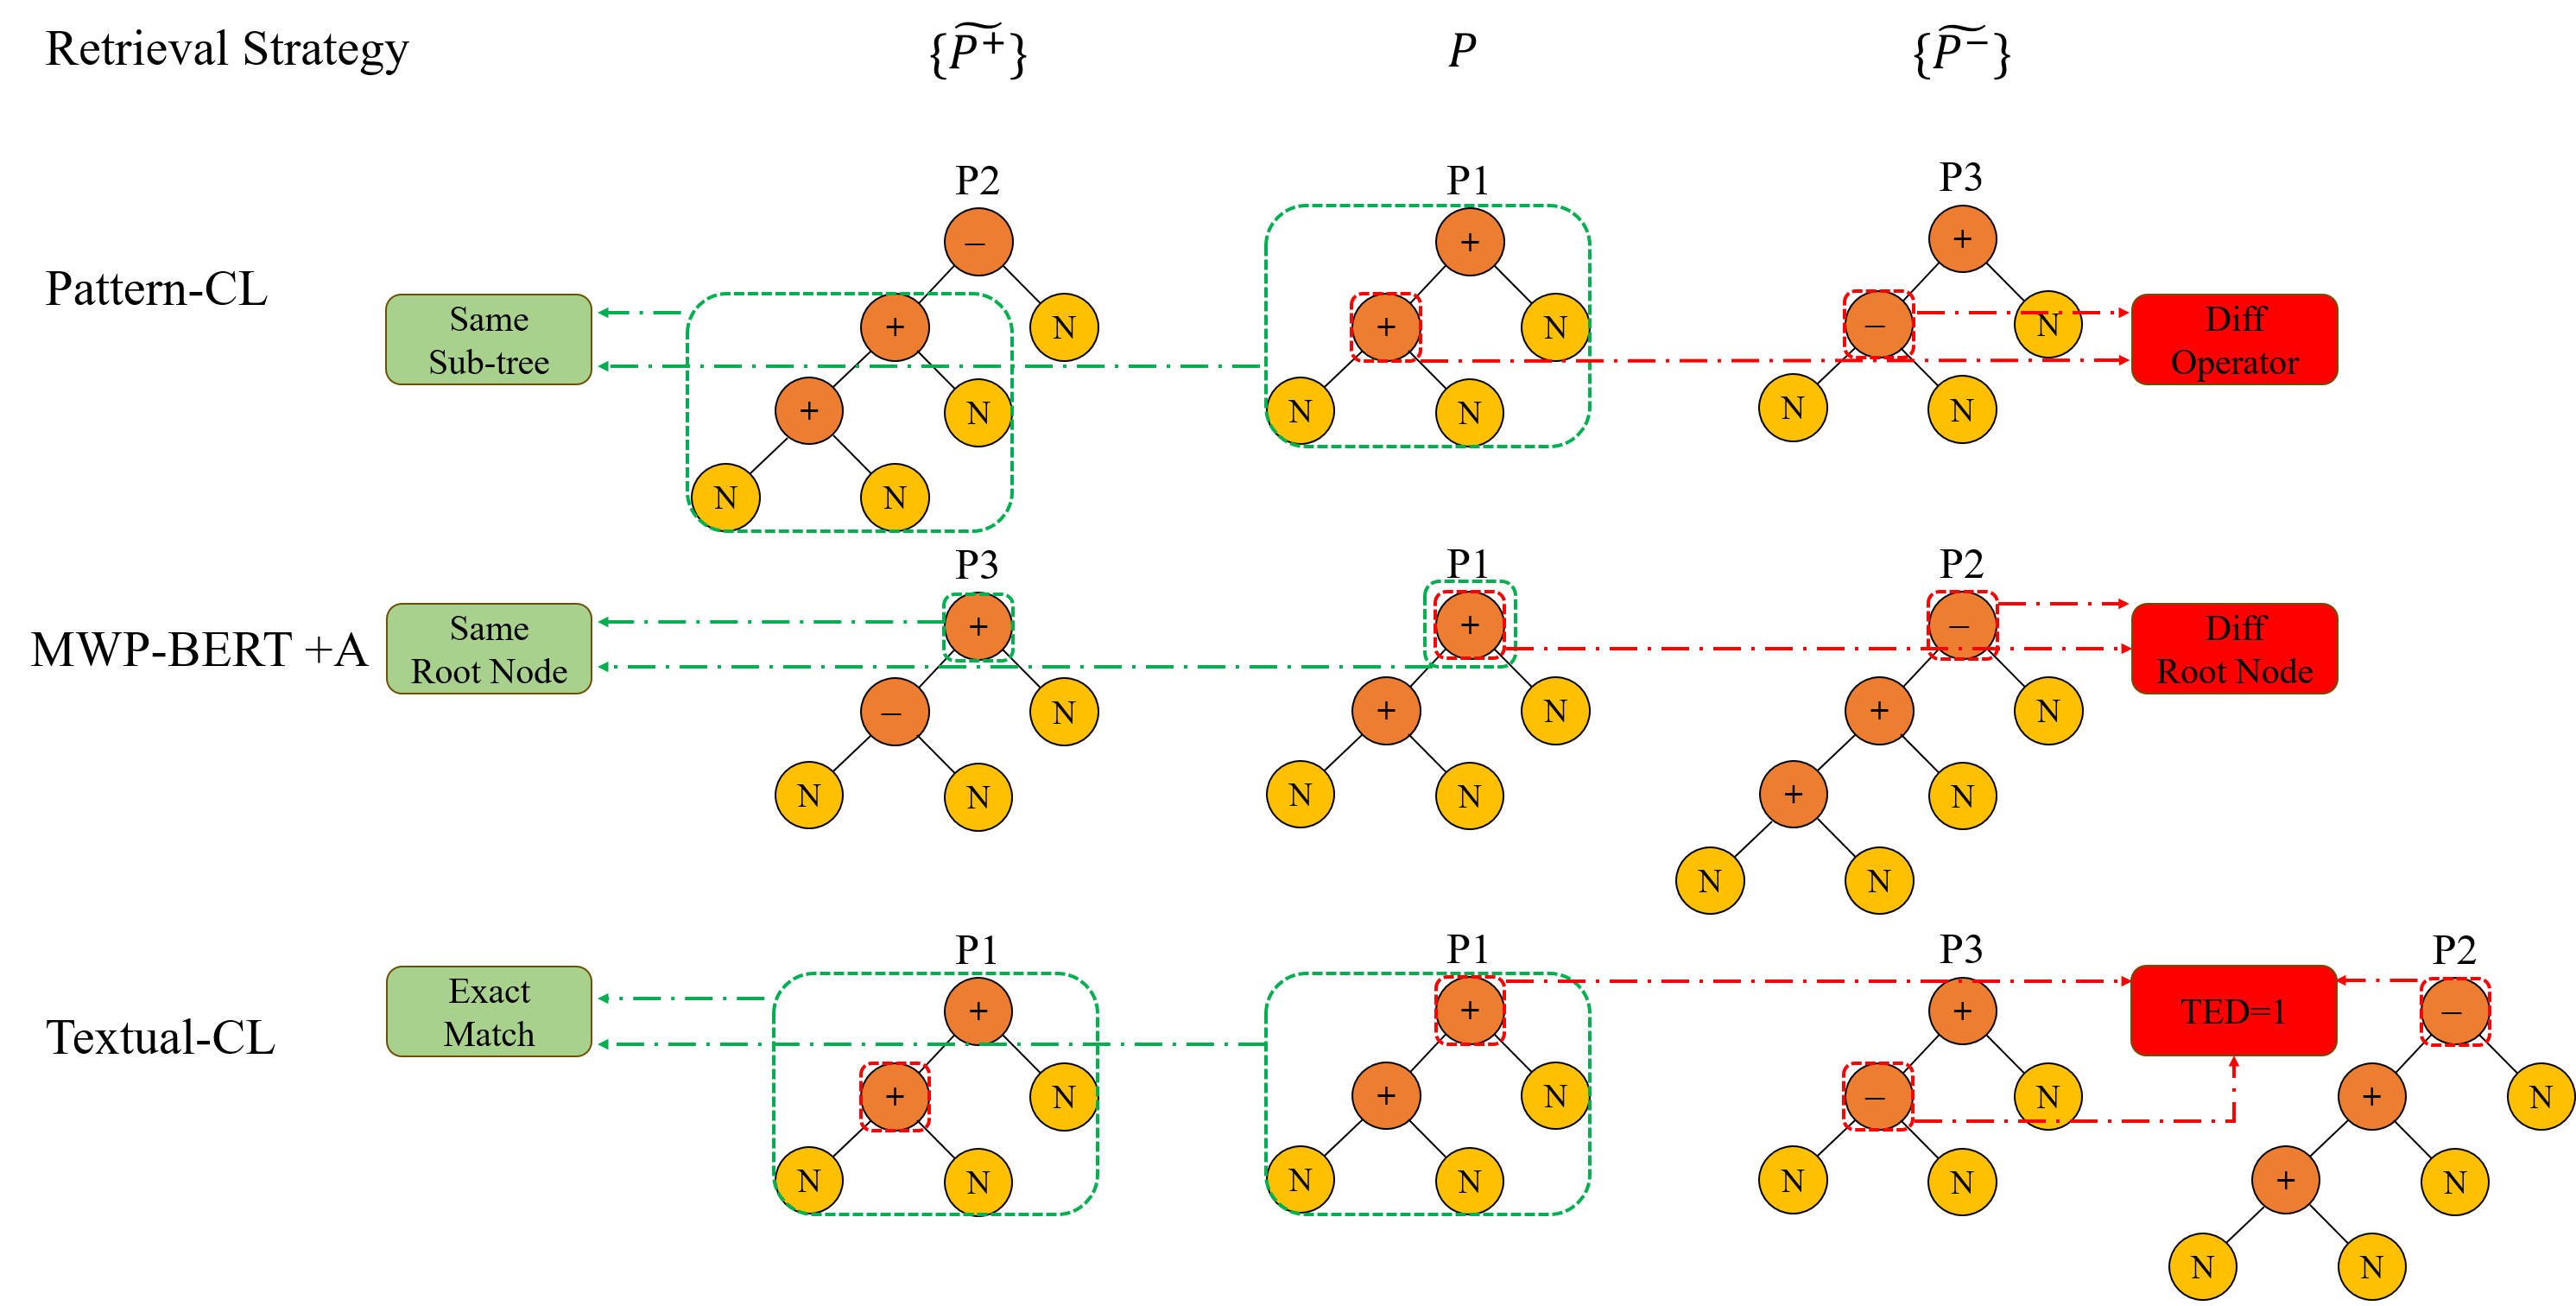 Figure 1 displays the generated triplets where P2 is selected as the positive example and P3 as the negative example by Pattern-CL. In contrast, the assignments are reversed for MWP-BERT+Analogy, which selects P3 as positive and P2 as negative. Textual-CL designates itself as the positive example and uses either P2 or P3 as its negative with a TED of 1 when only operator nodes are considered. The figure illustrates how different, and even contradictory, triplets can be constructed using just three samples, highlighting potential complications in larger candidate pools.